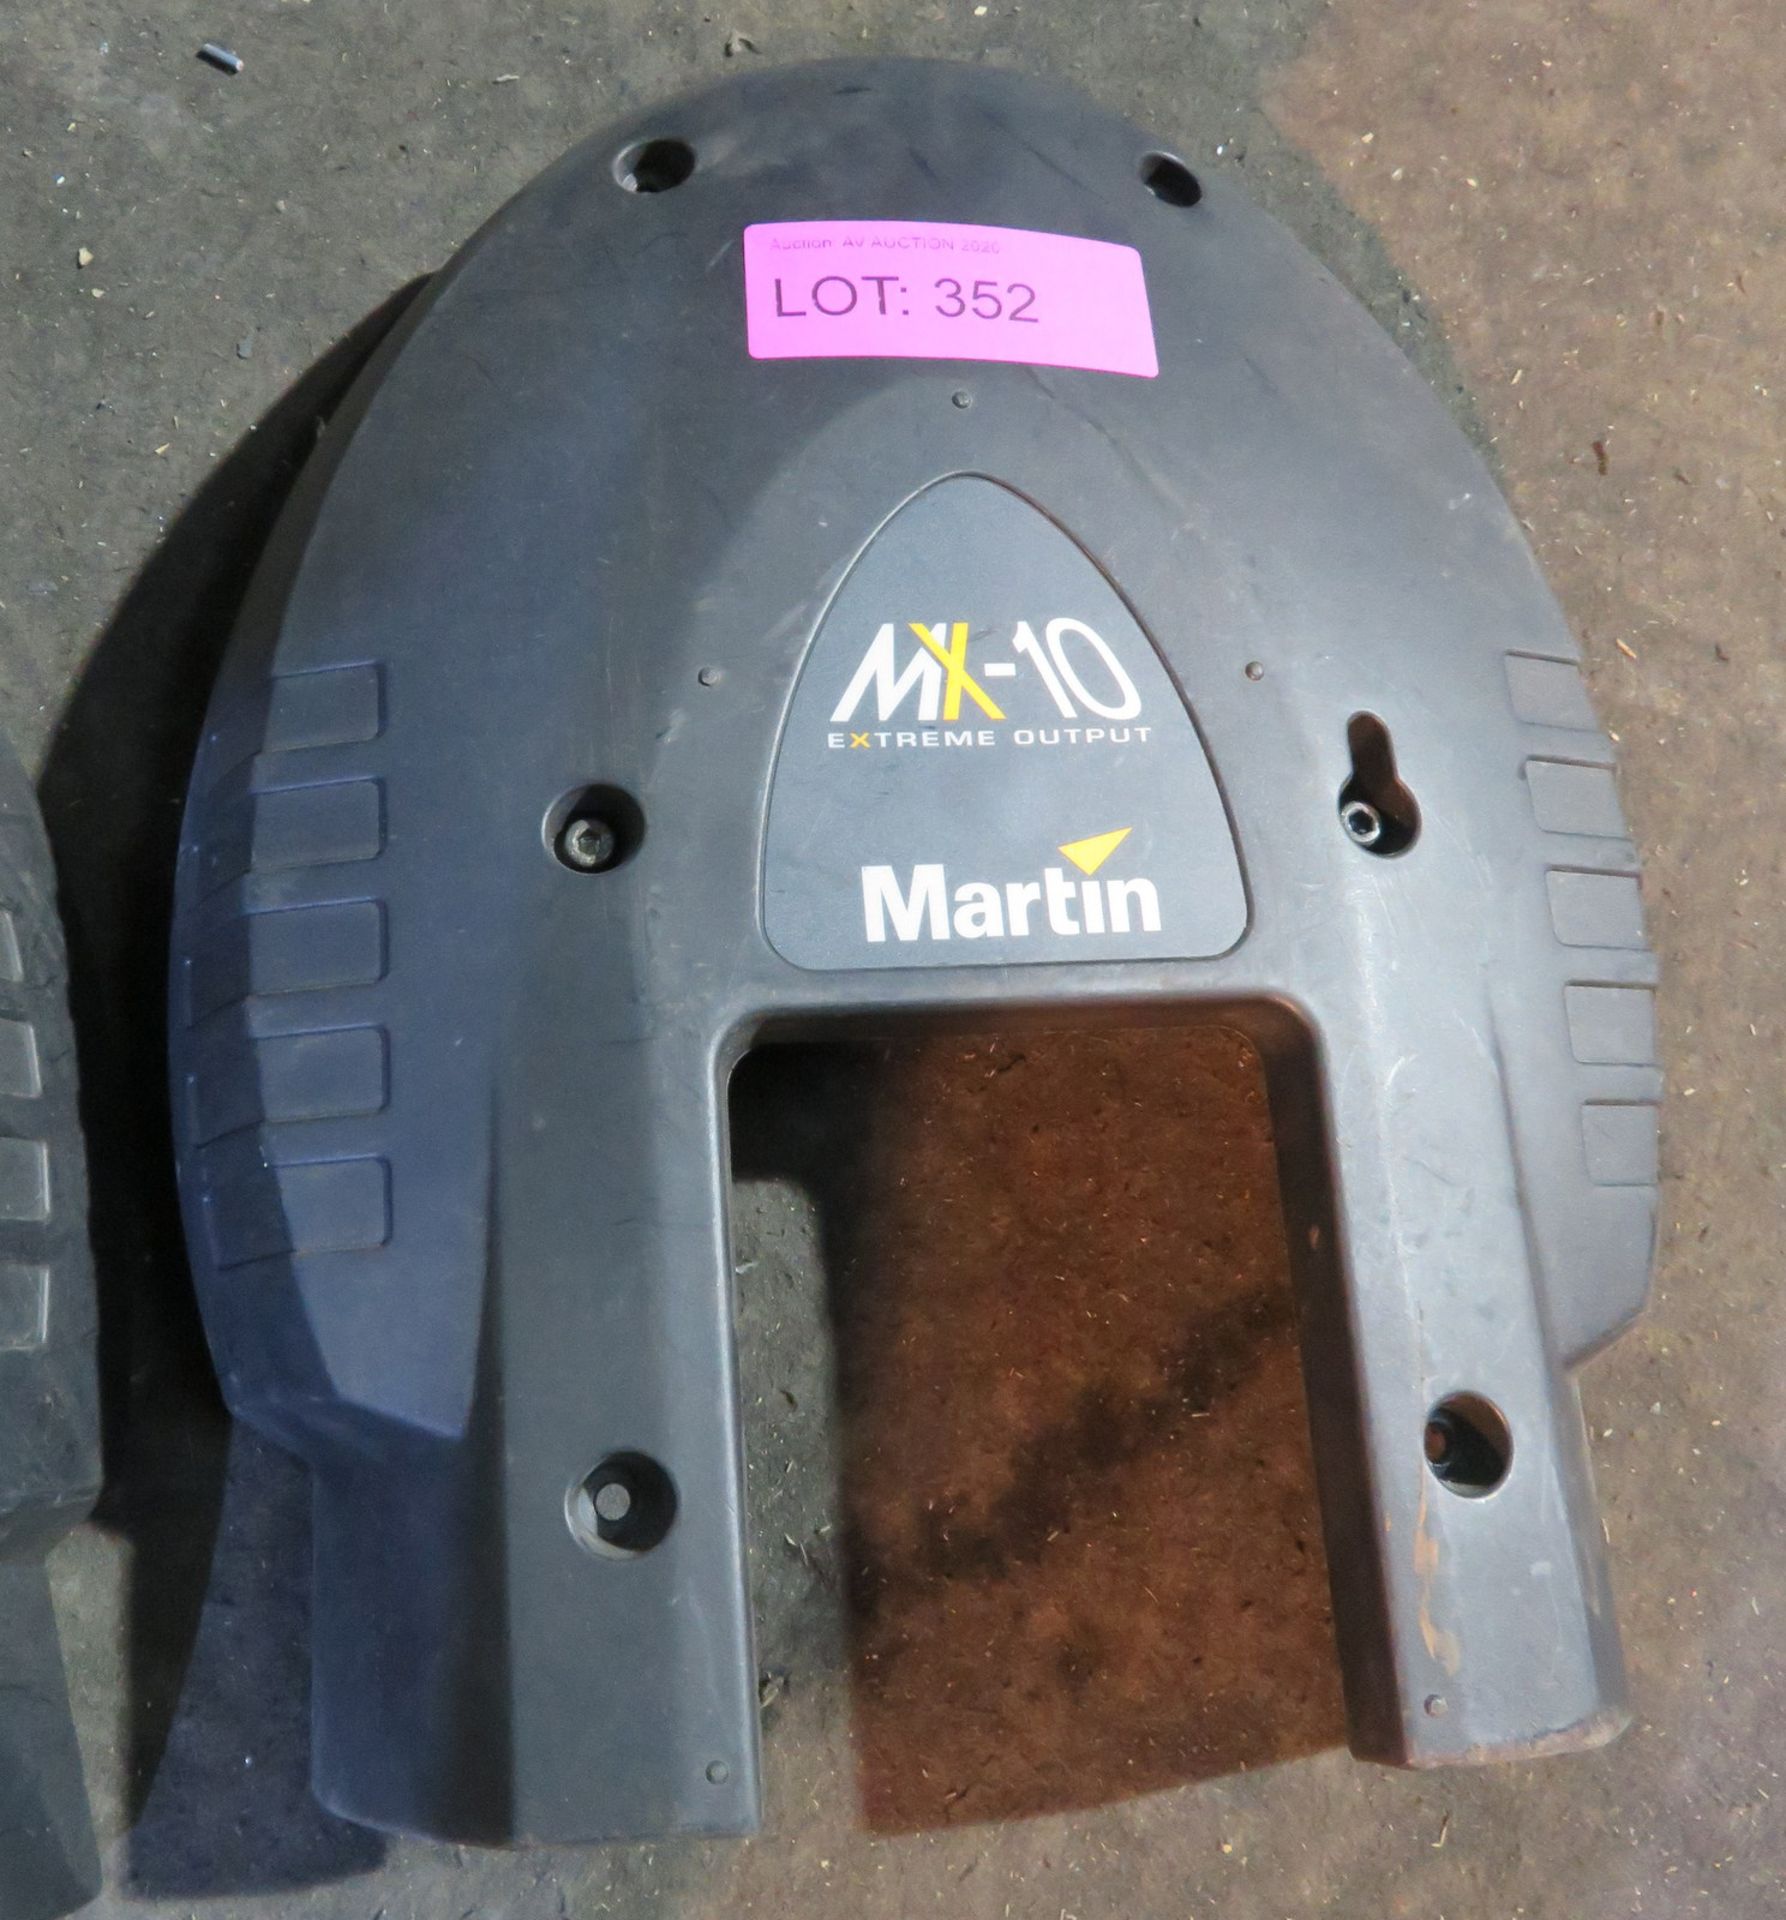 2x covers for Martin MX-10 - Image 4 of 5